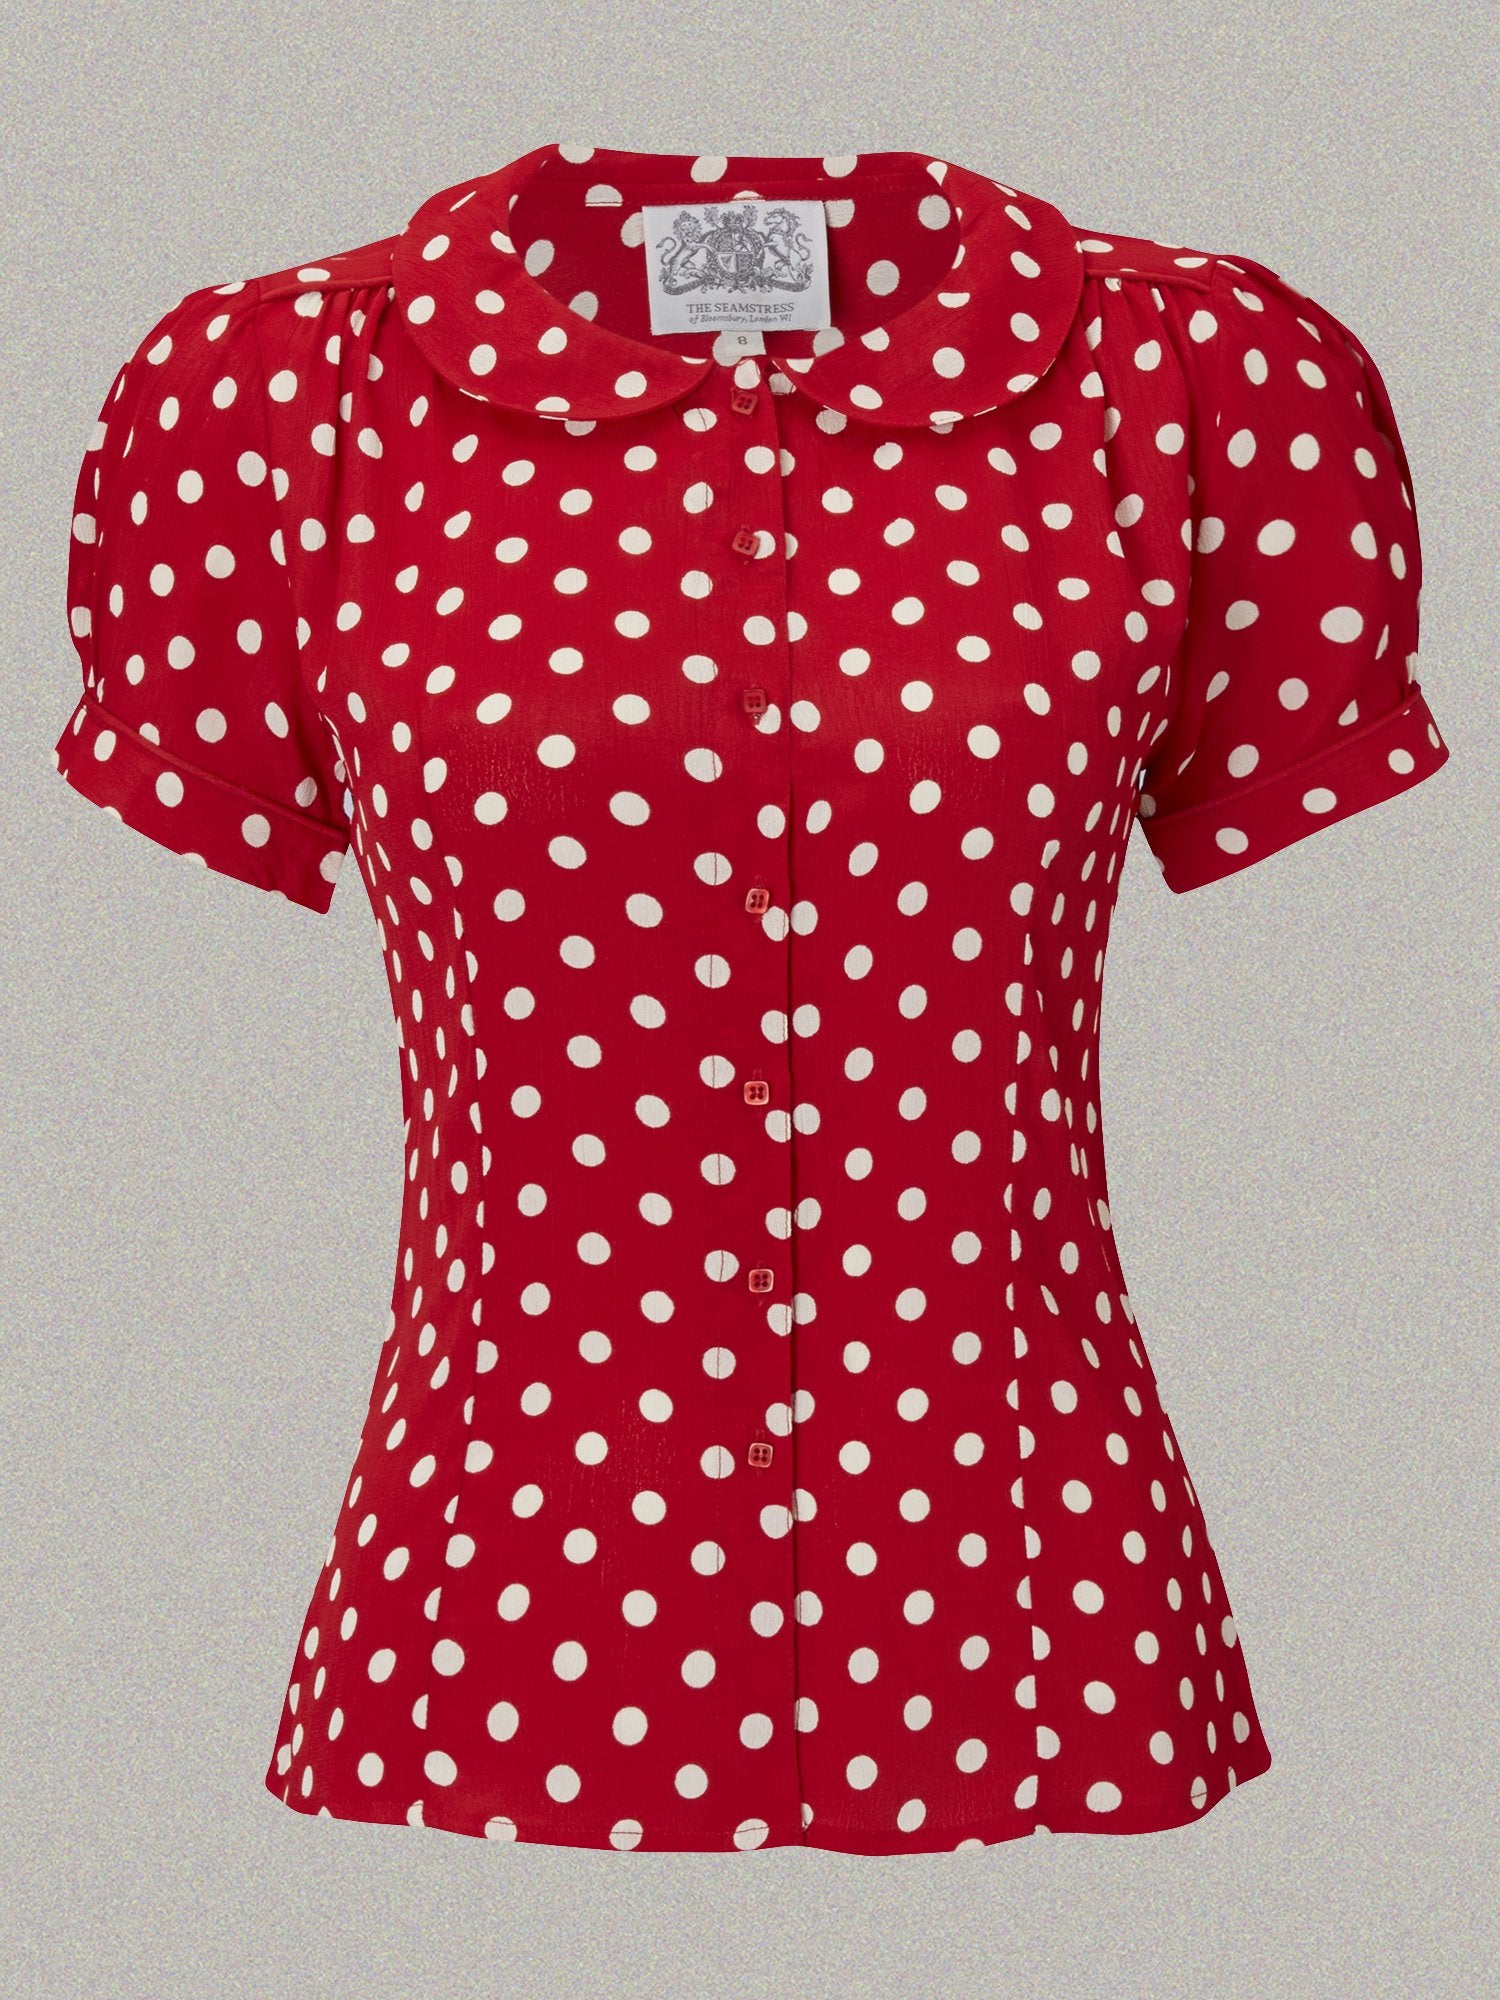 1940s Blouses, Tops, Shirts, Knitwear Jive Short Sleeve Blouse in Red with Polka Dot Spot Classic 1940s Vintage Style £39.95 AT vintagedancer.com